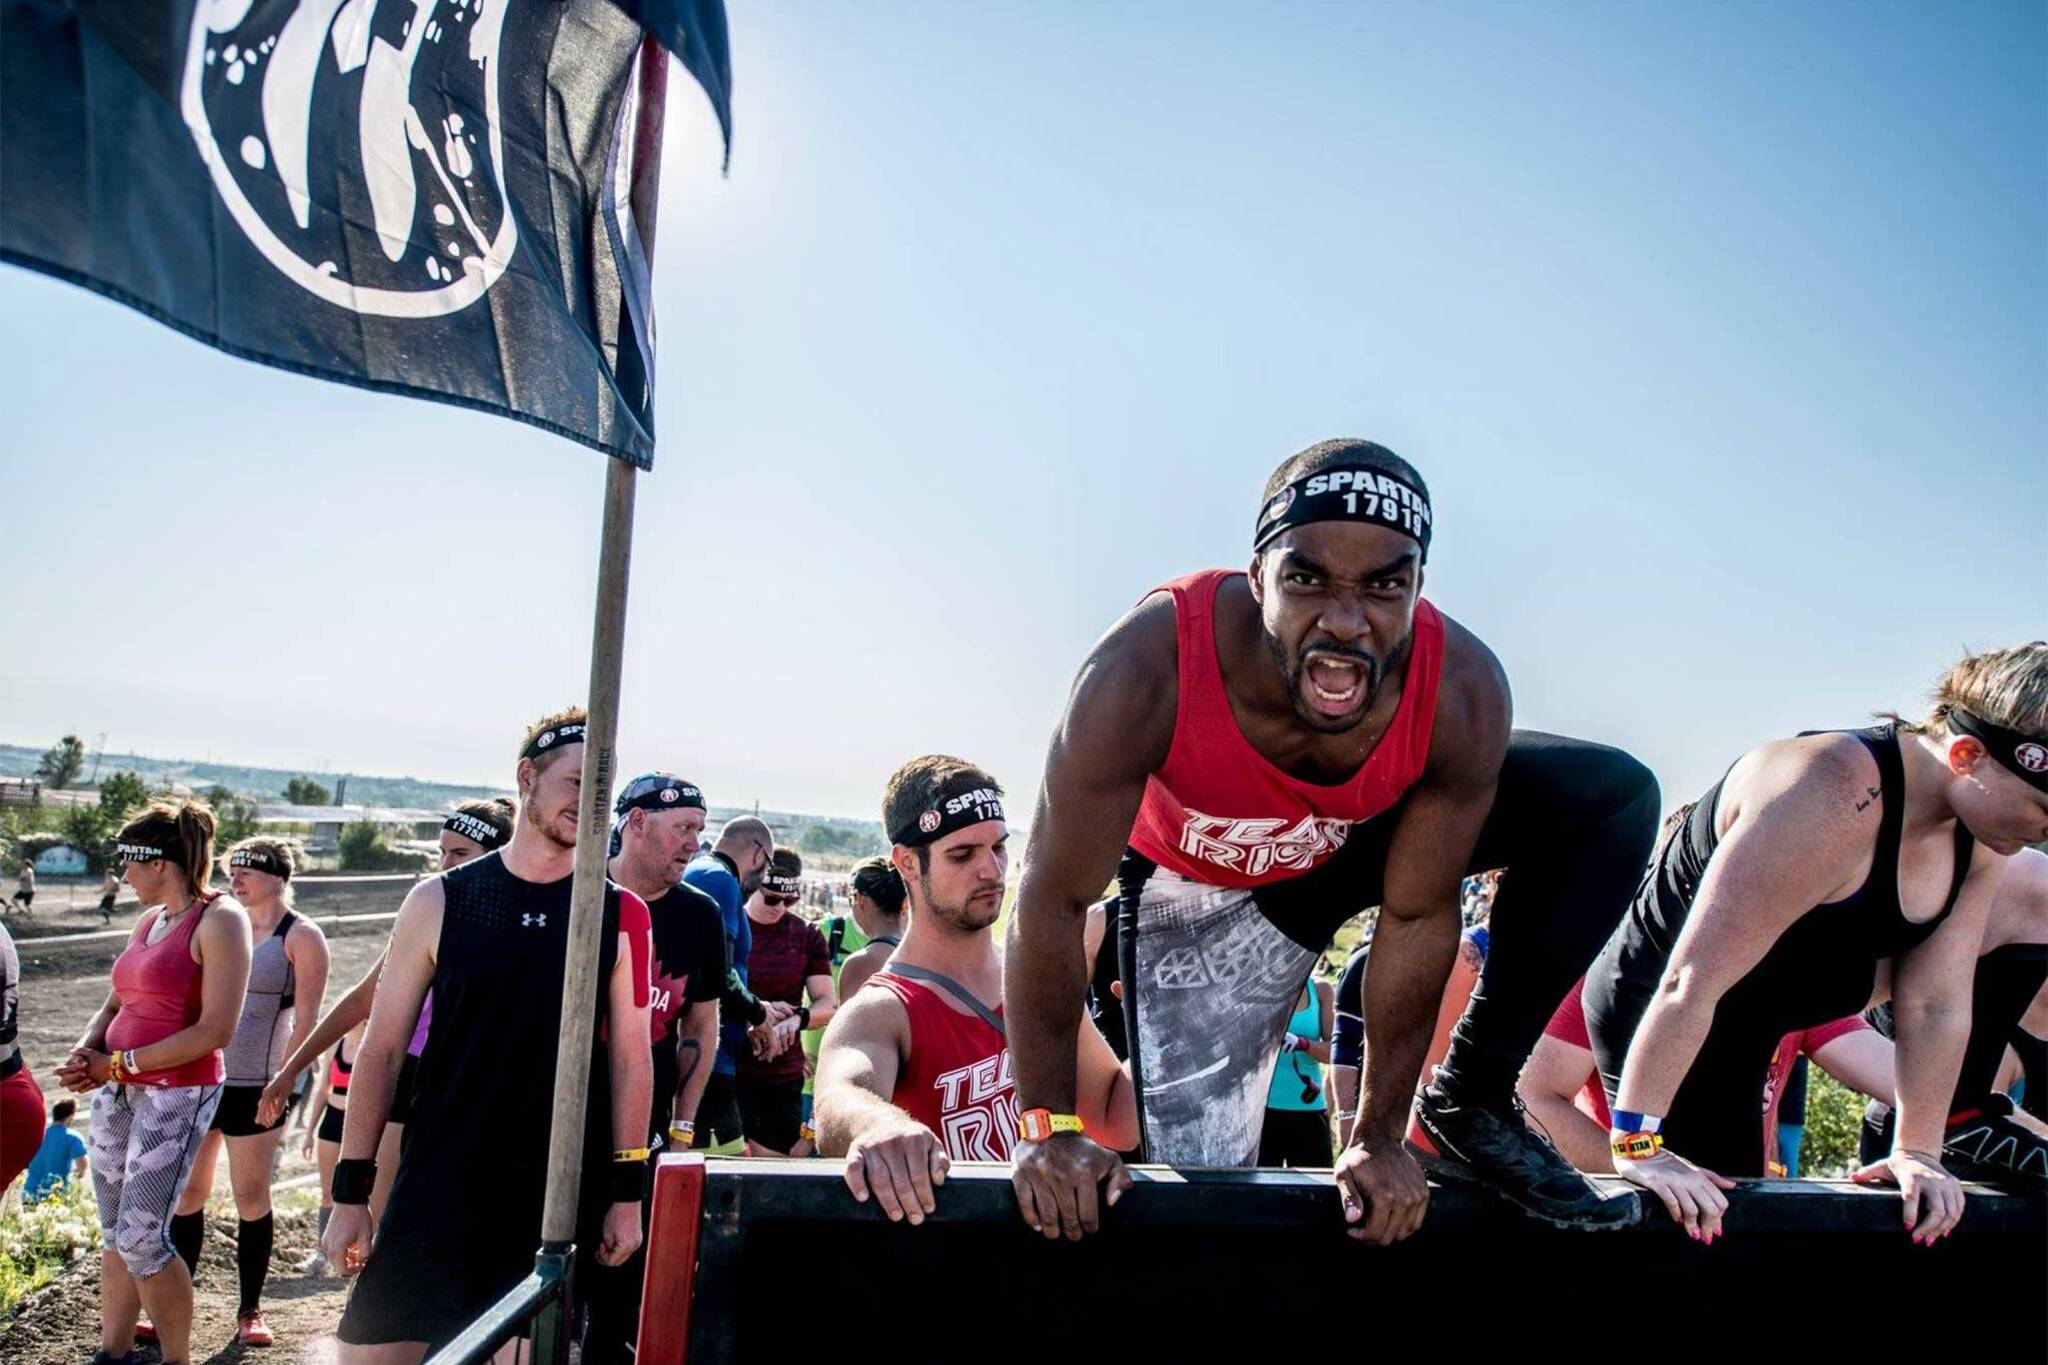 Obstacle and endurance brand Spartan criticized for not offering